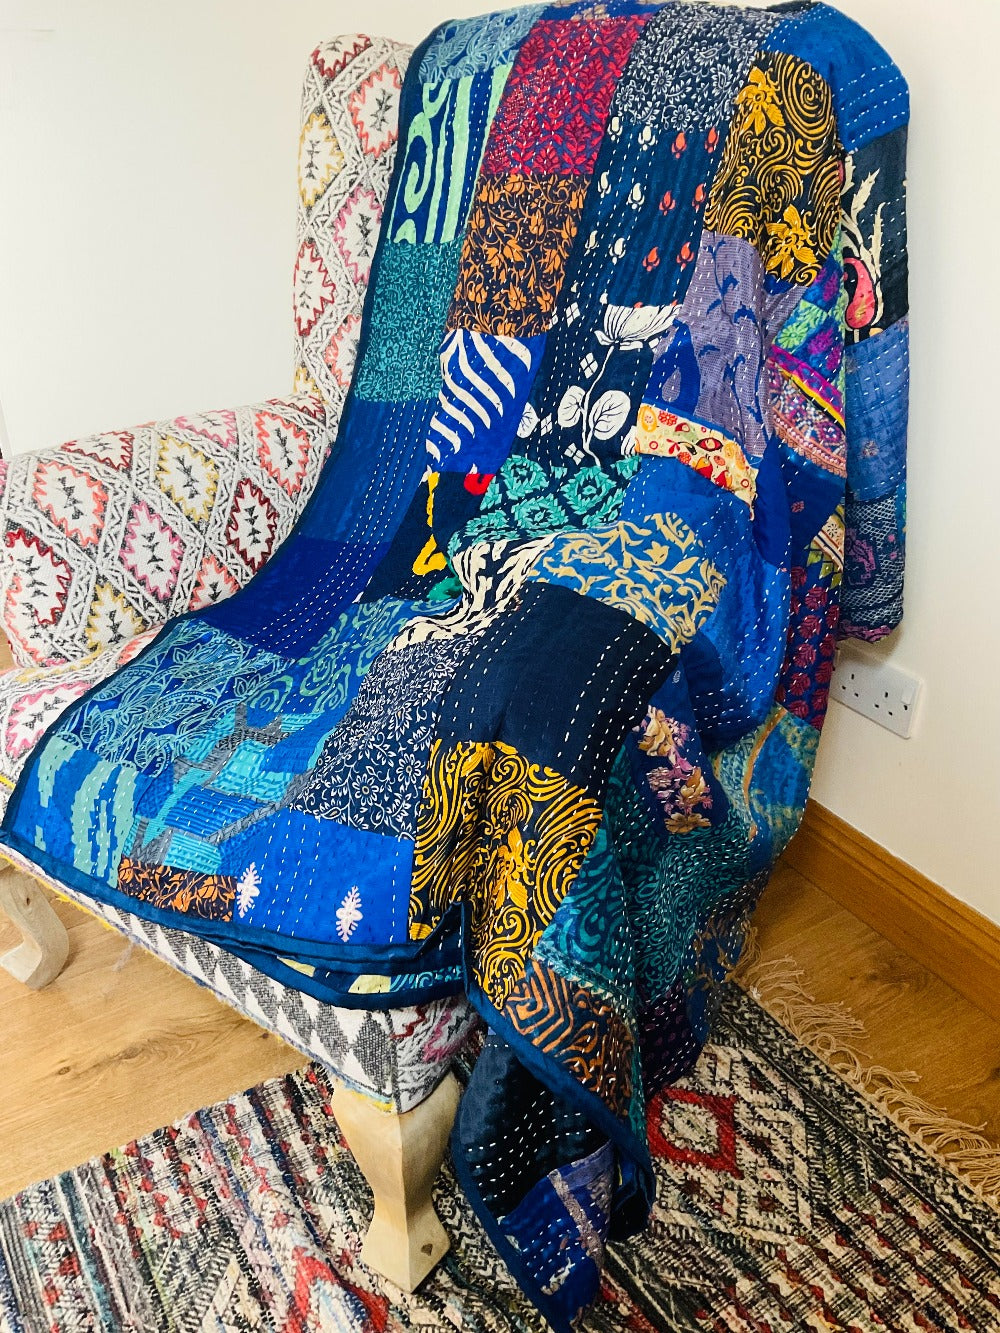 Handmade Indian Kantha Recycled Blue Patchwork Cotton Sari Throw Bedspread Cover 230 cm x 280 cm